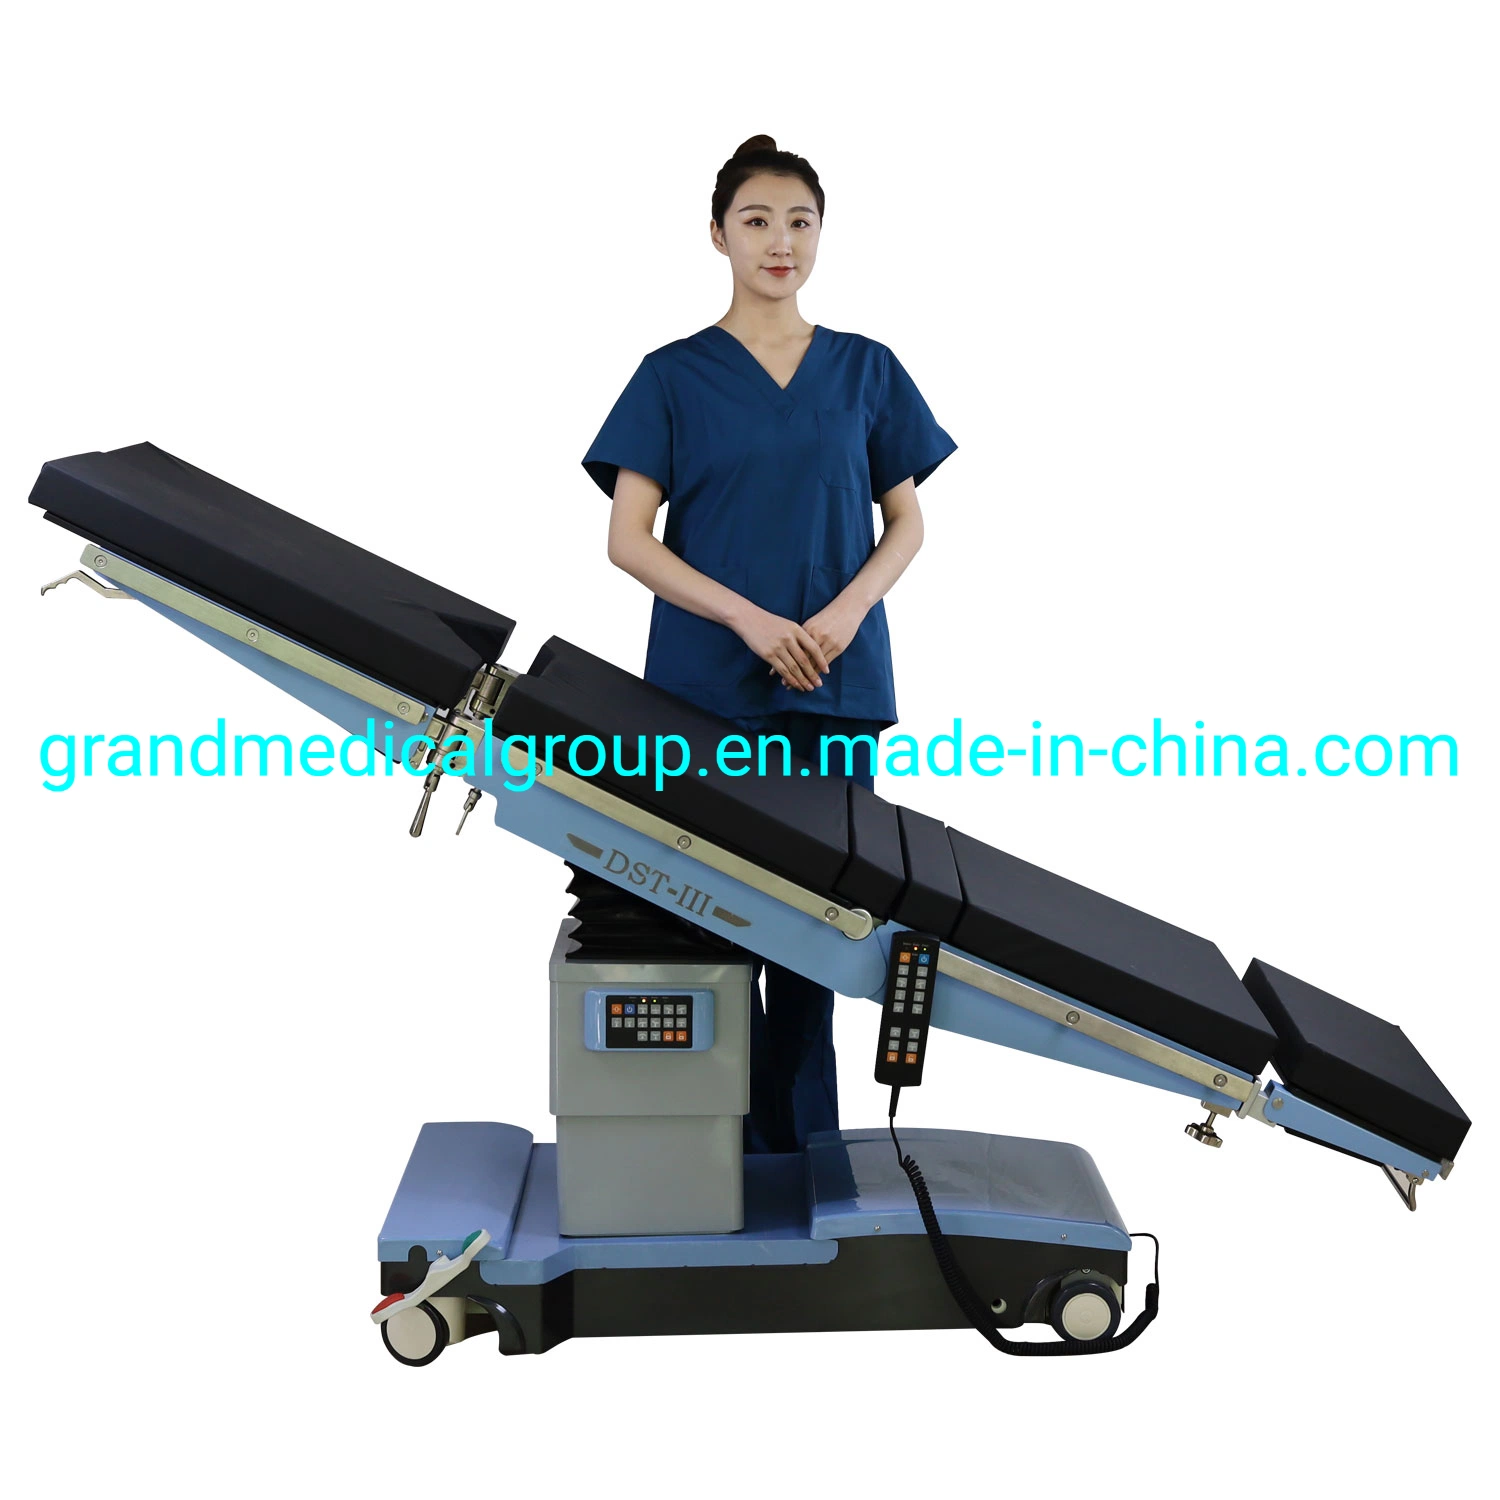 High End Hydraulic Electric Hospital Surgical Table Medical Operation Tablespecial Imaging C Arm Operating Table for Hospital Operation Room Equipment